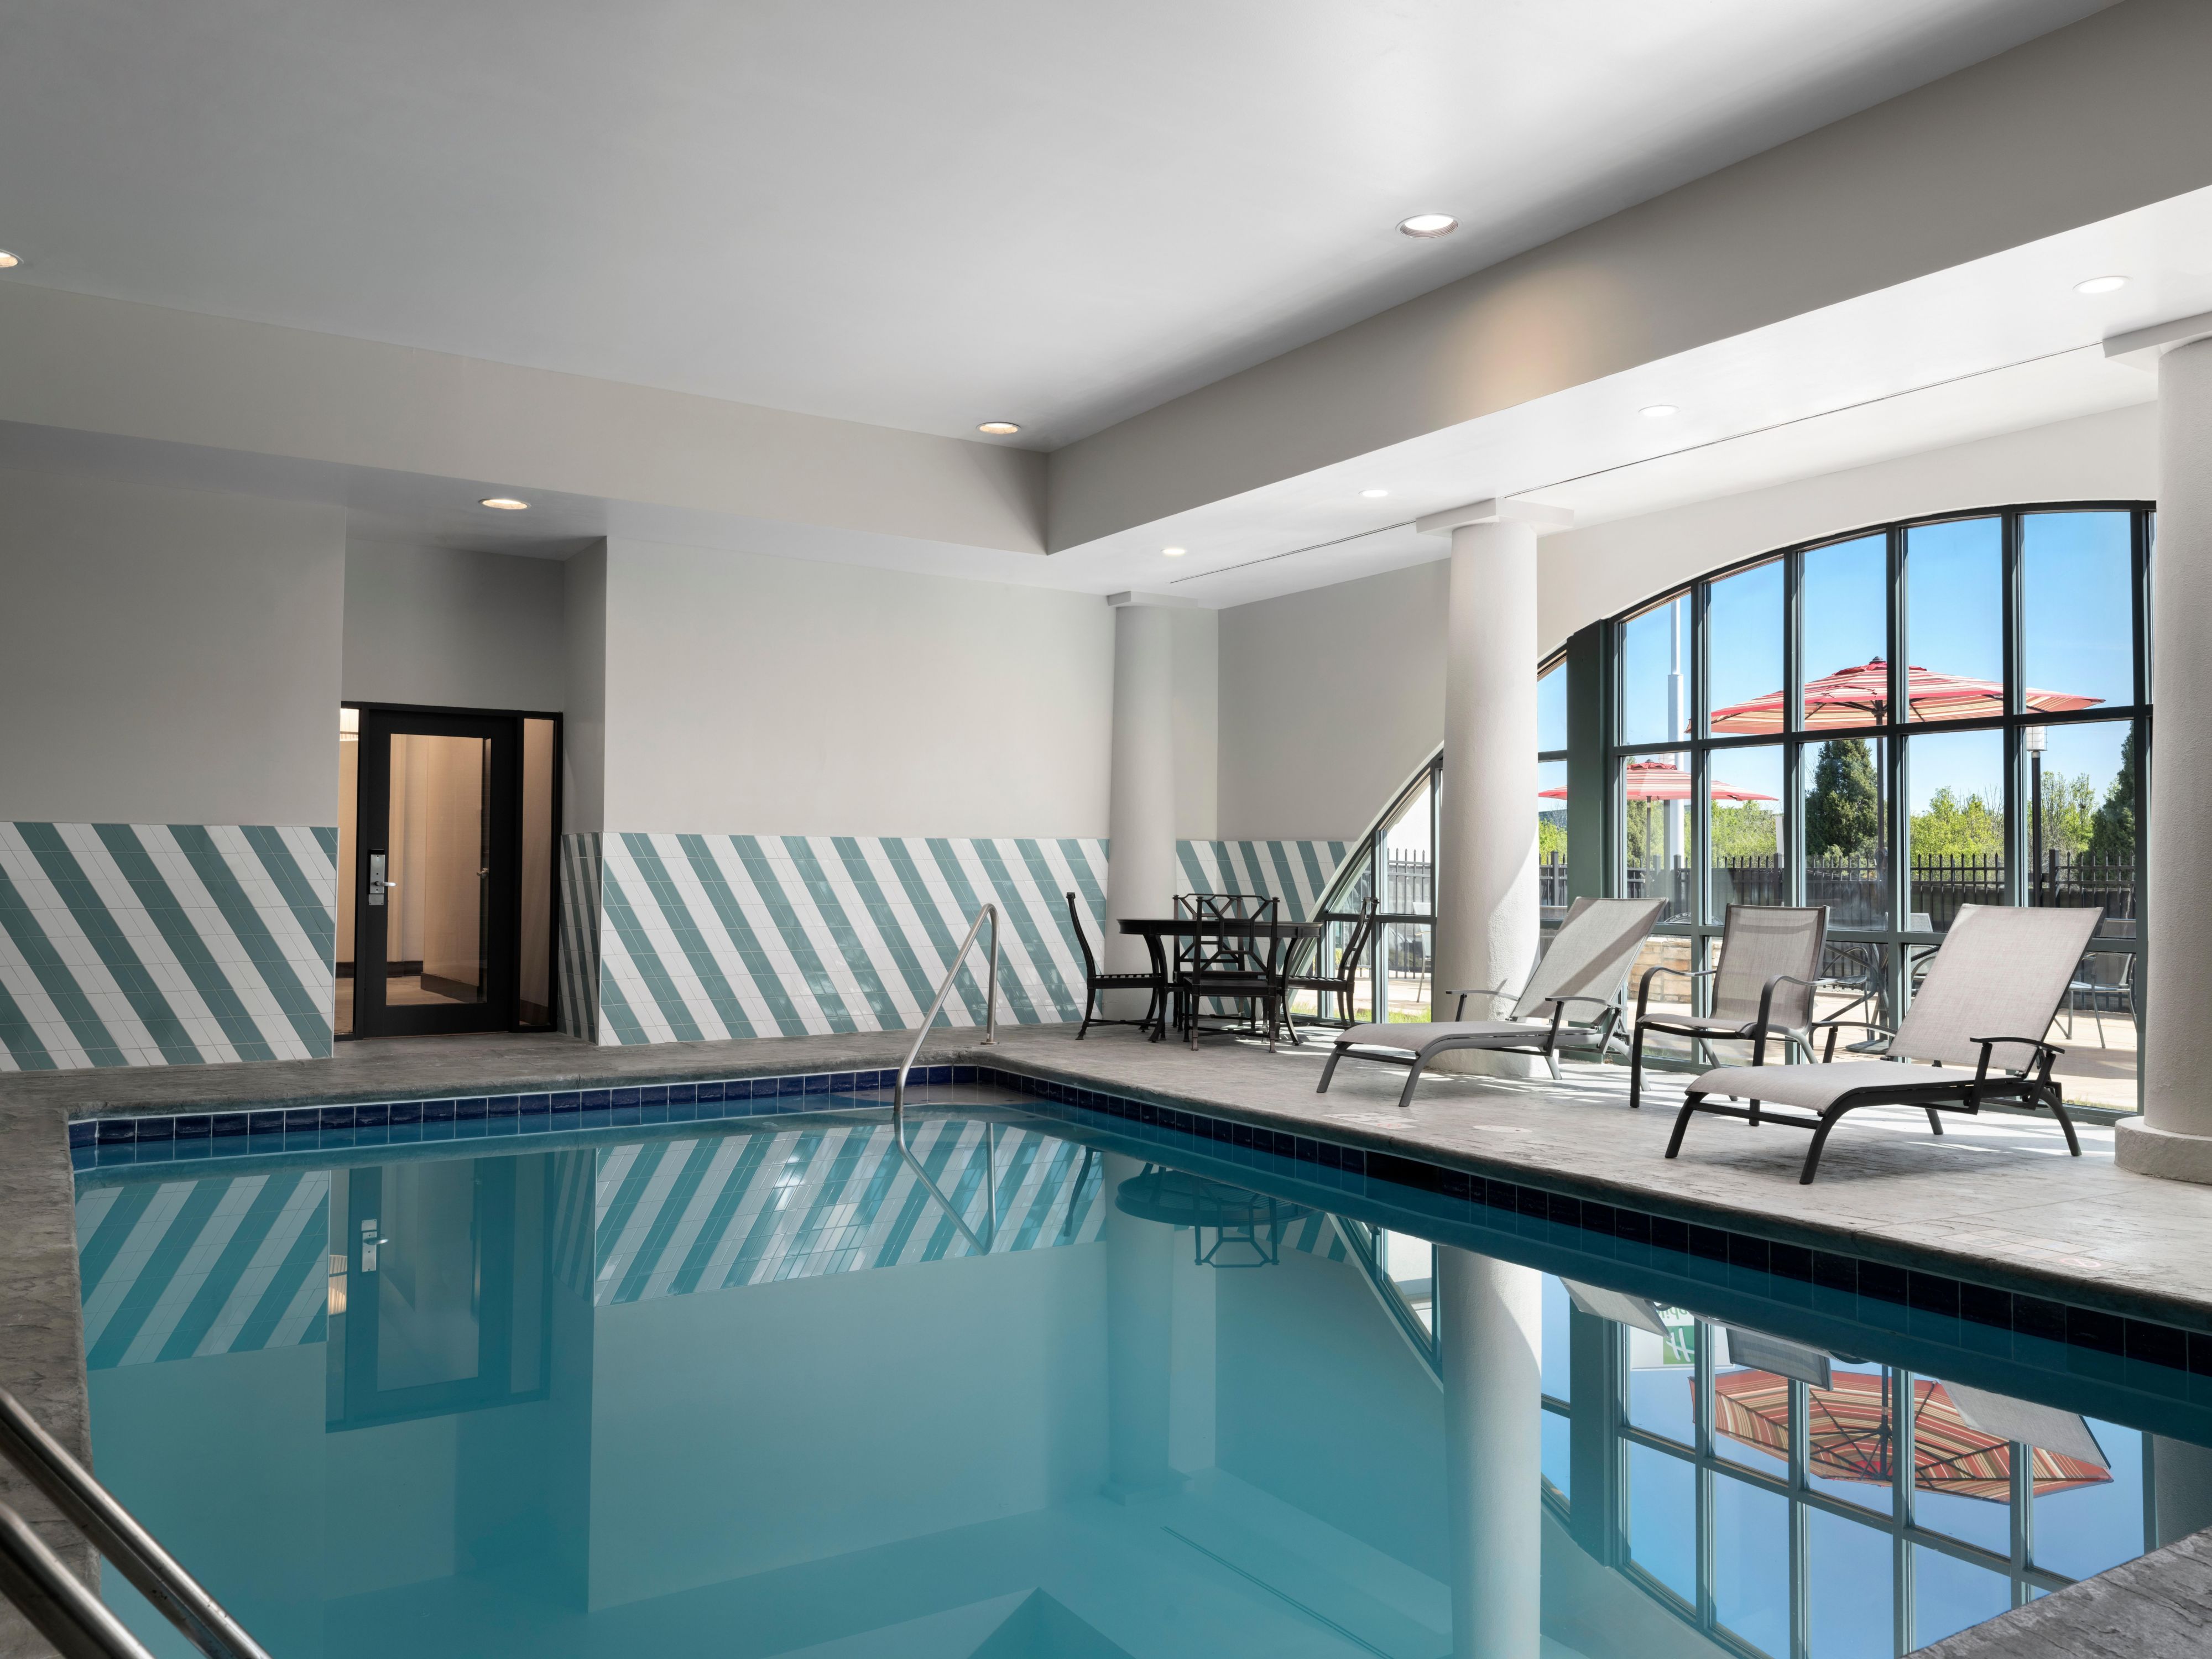 After a busy day of travel or out visiting Cincinnati, return to our inviting indoor pool! Kick back and relax in a lounge chair overlooking the crystal blue water and take a dip to refresh.